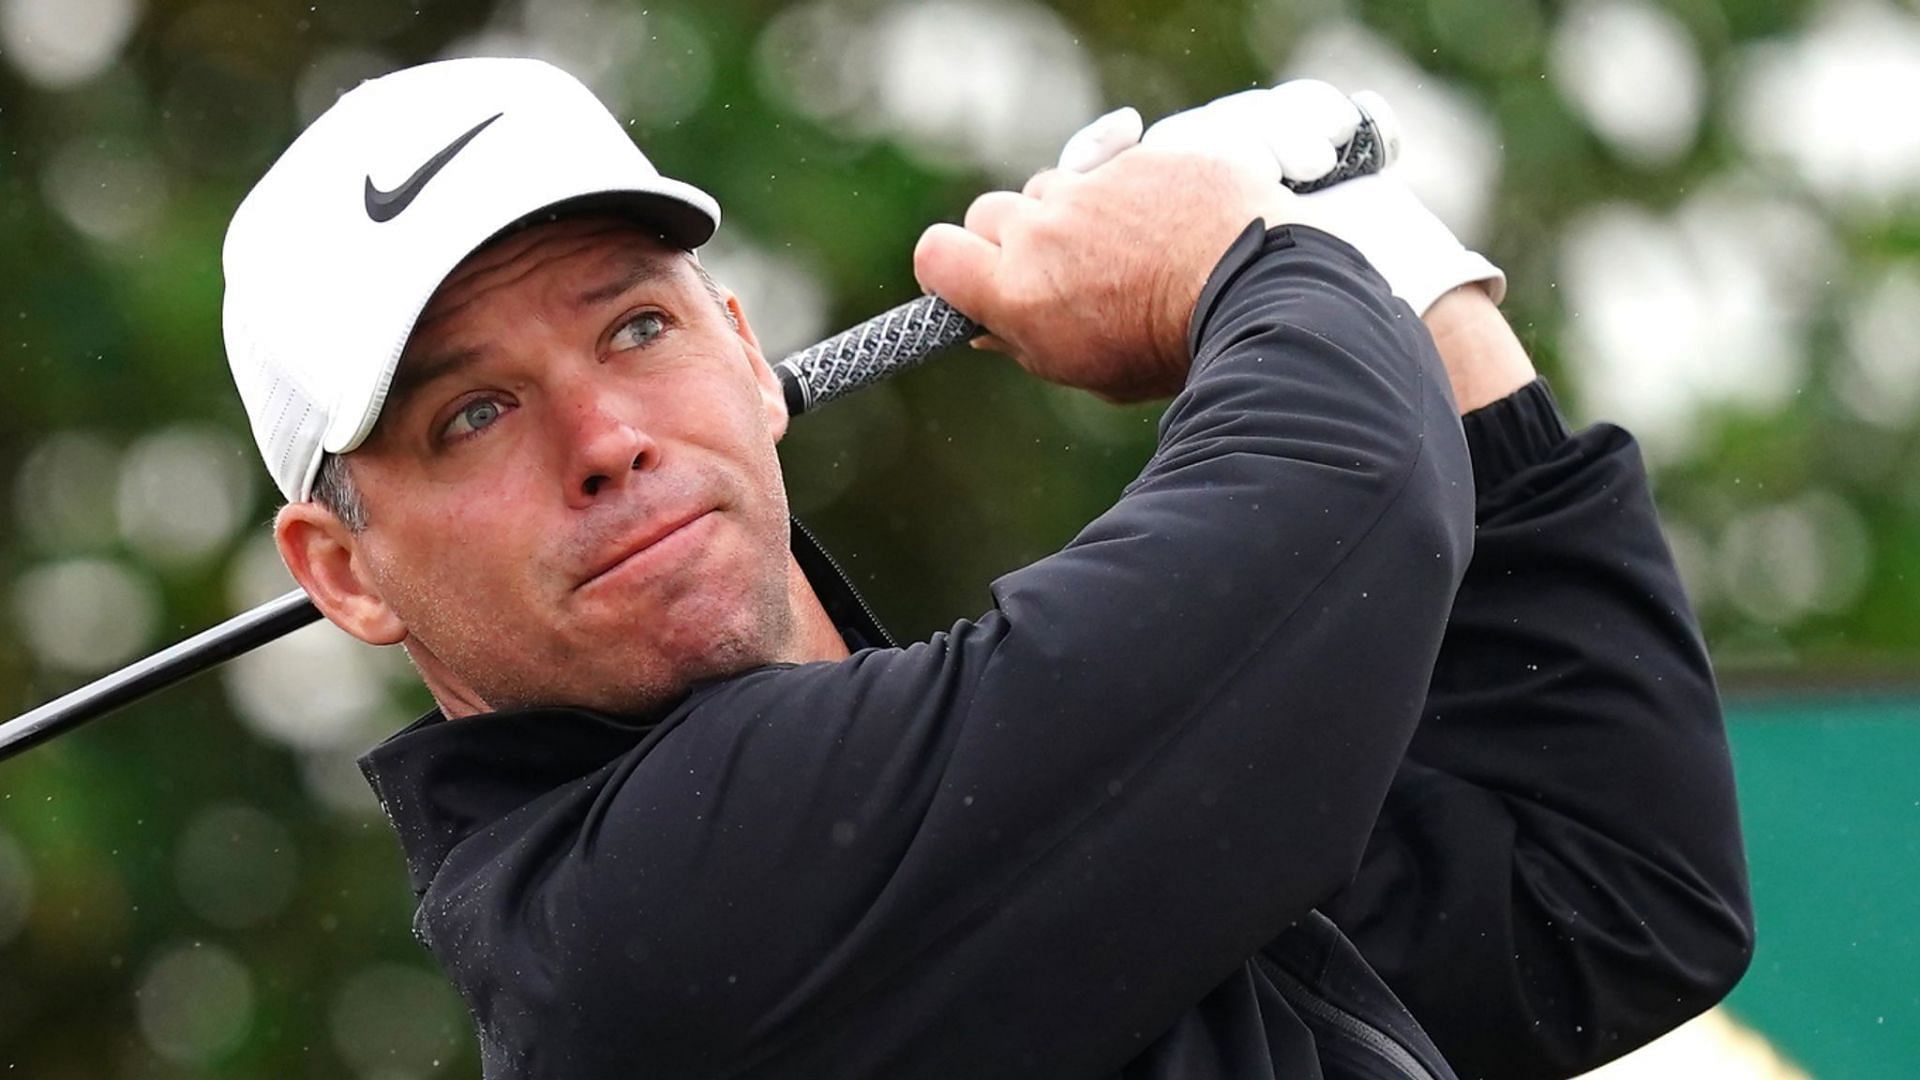 Paul Casey was impressive in his first round at LIV Golf Mayakoba event